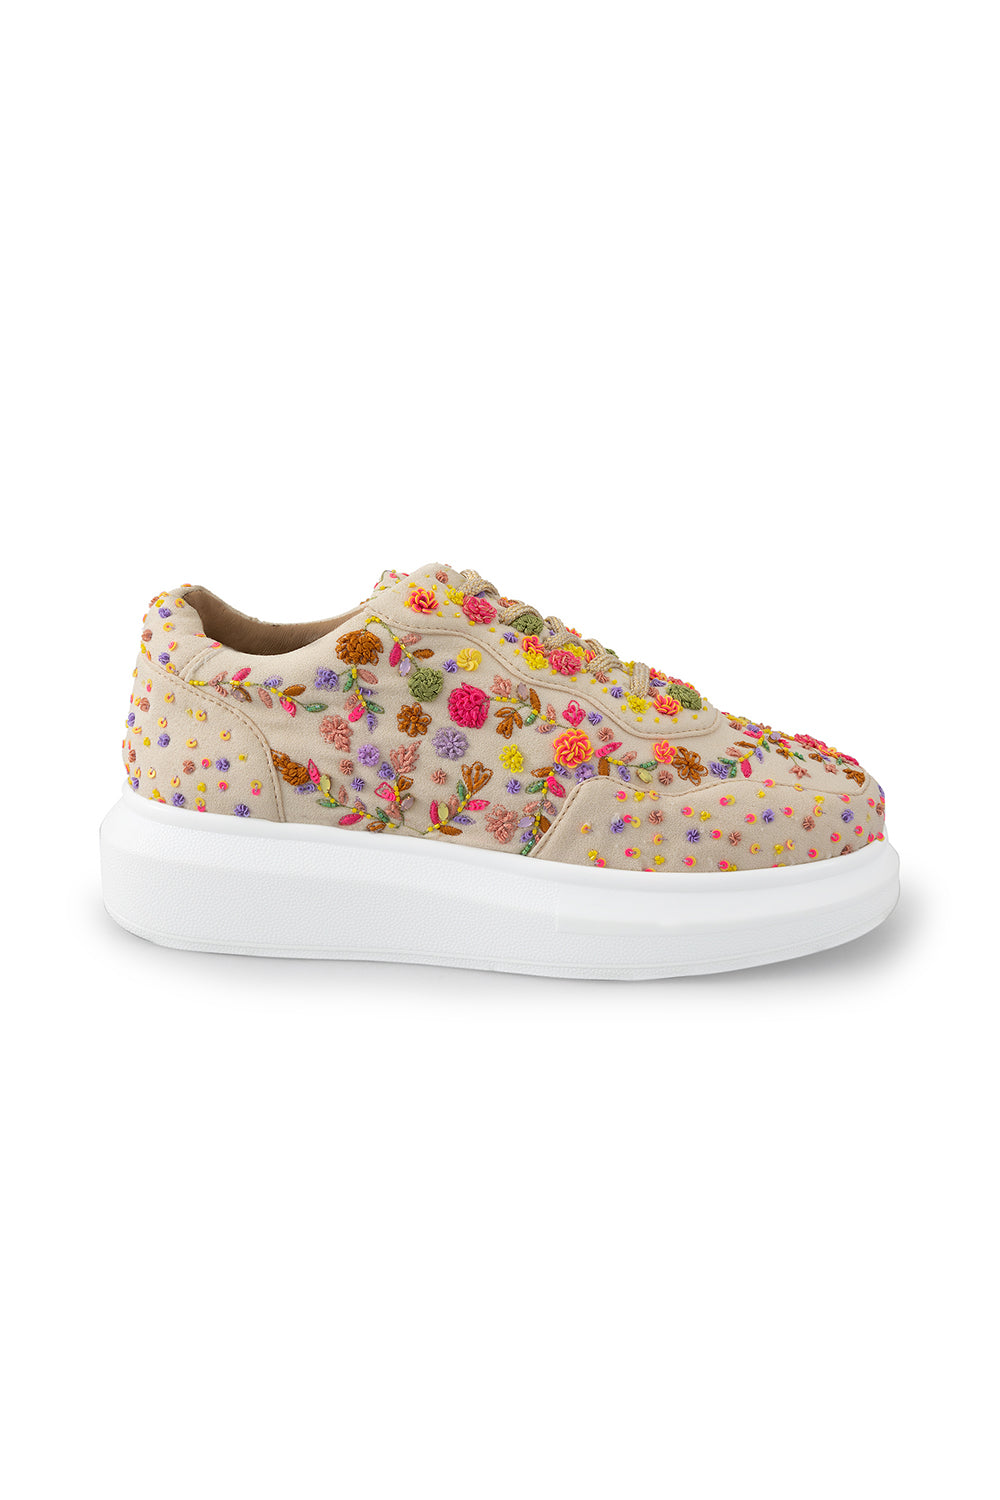 Multi Floral Corsage Classic Wedge Sneakers